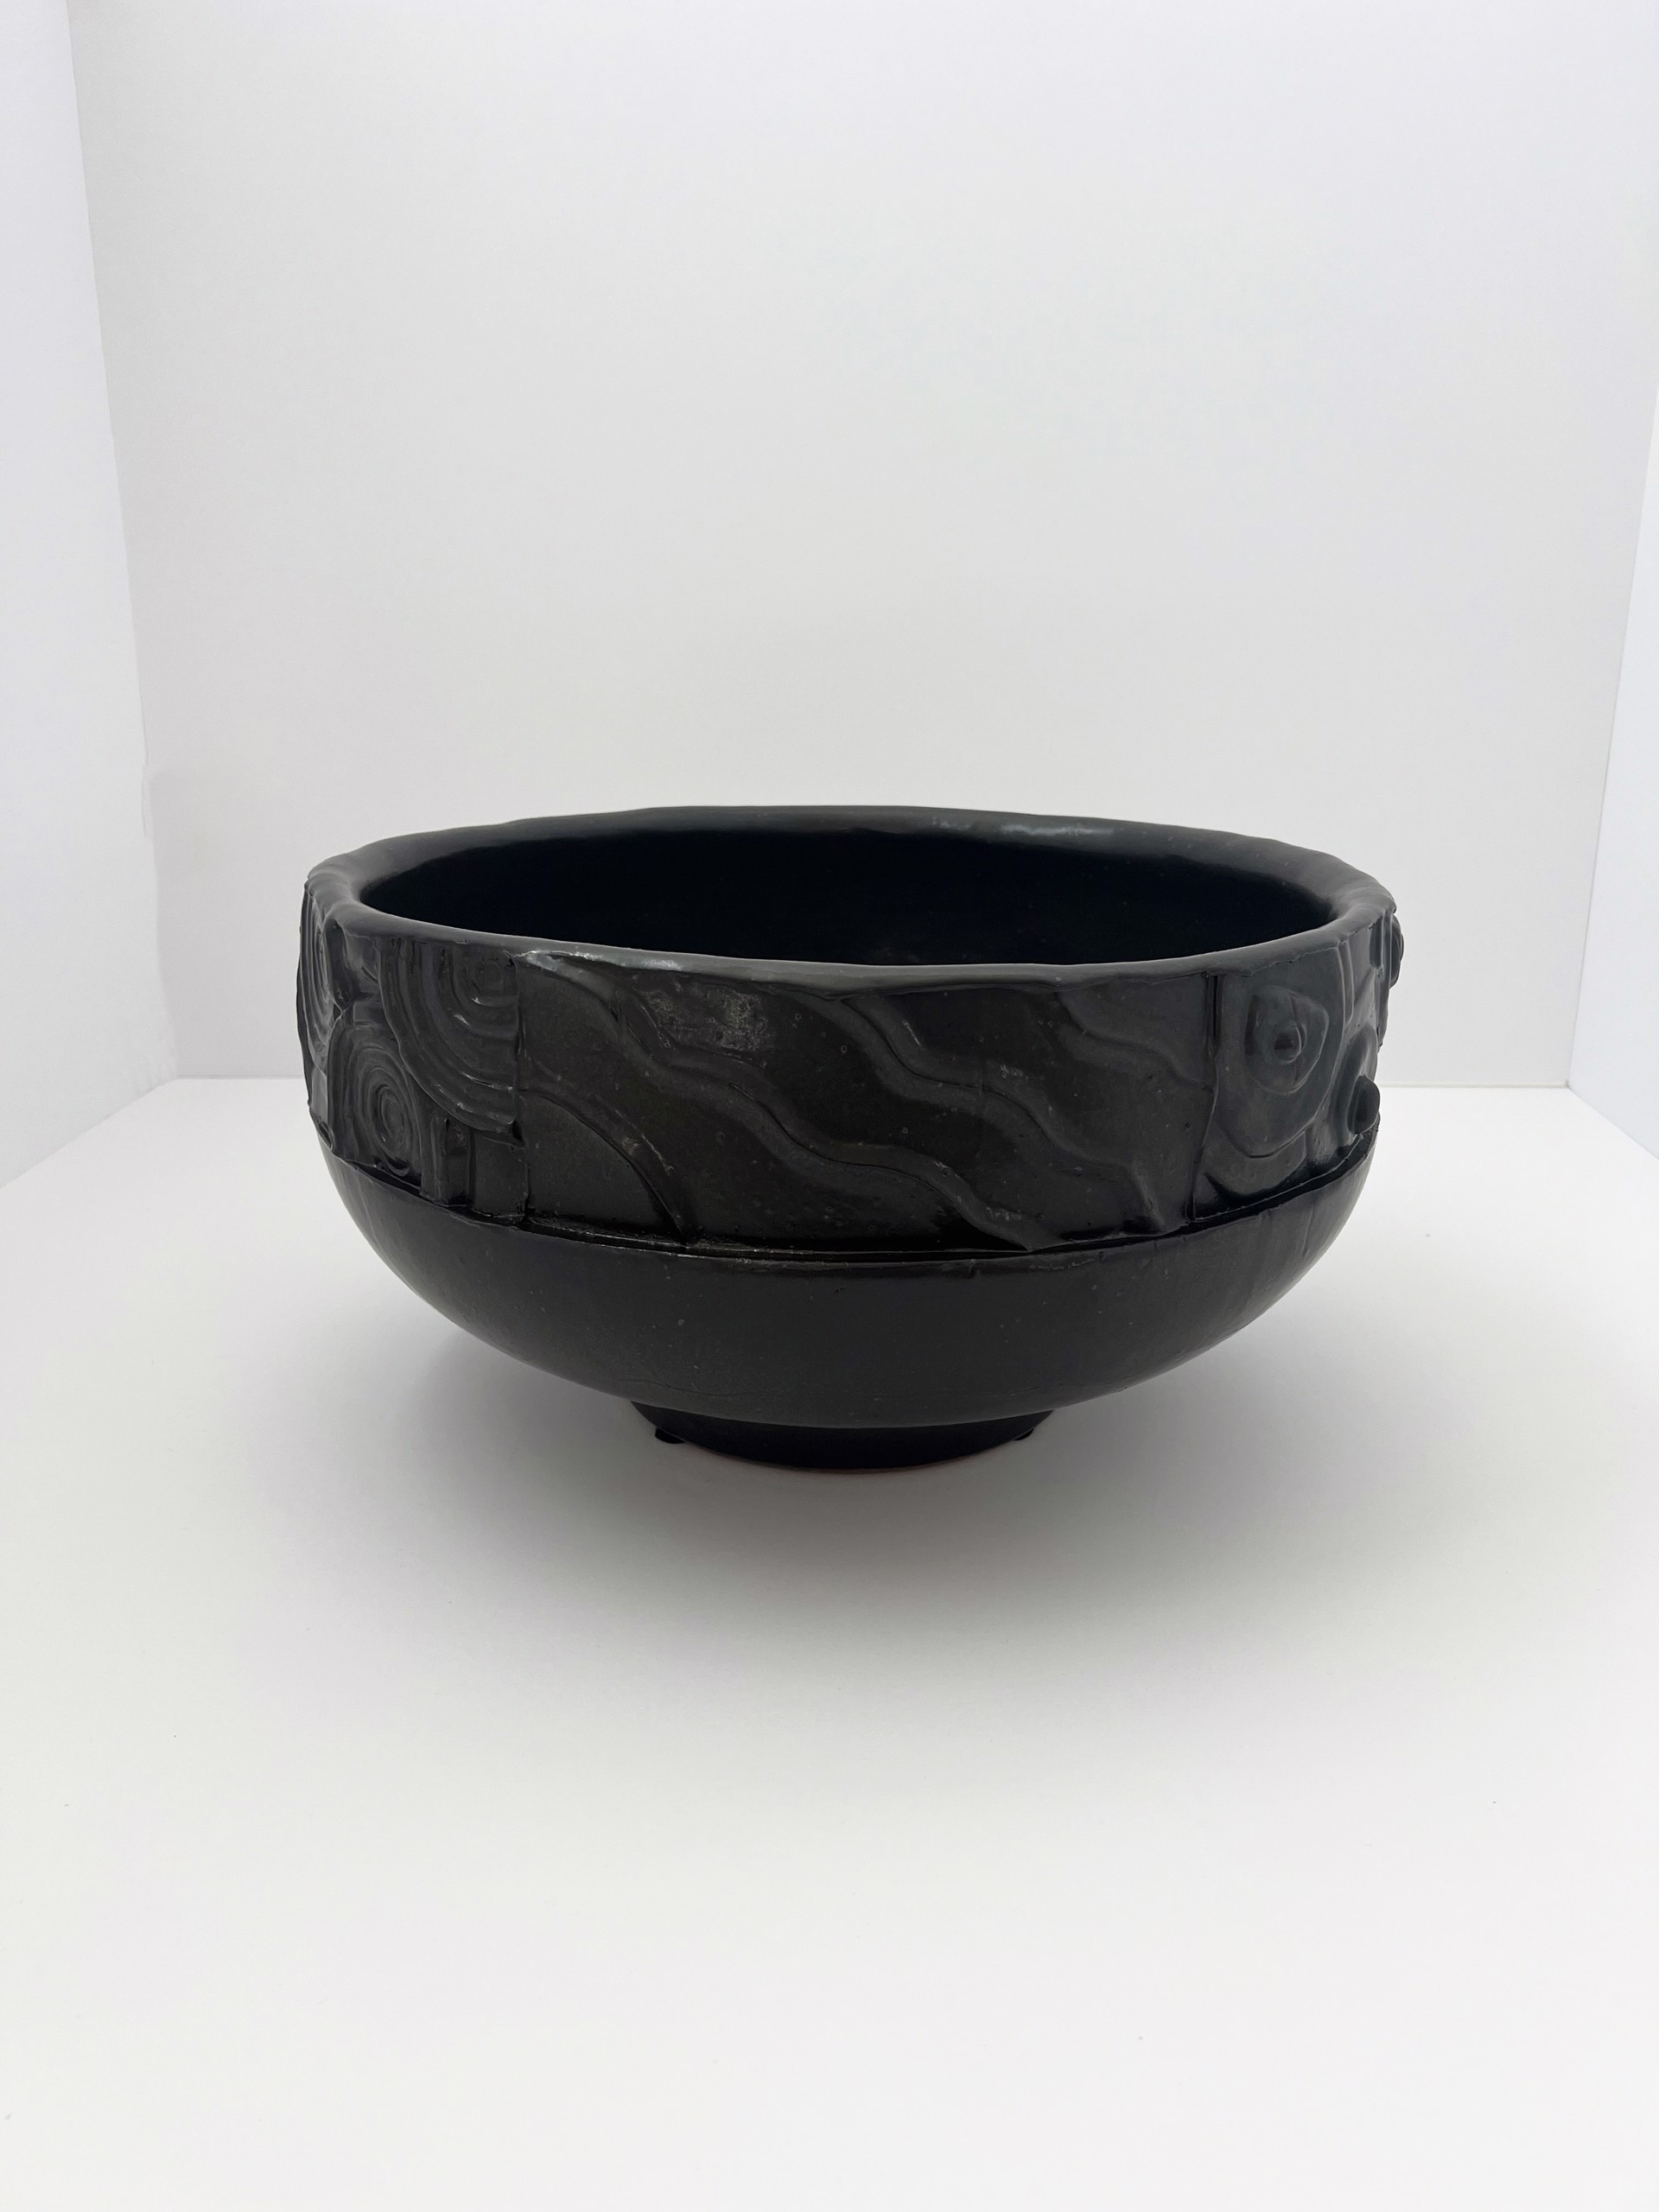 Glazed Earthenware Bowl by Ceramics Factory